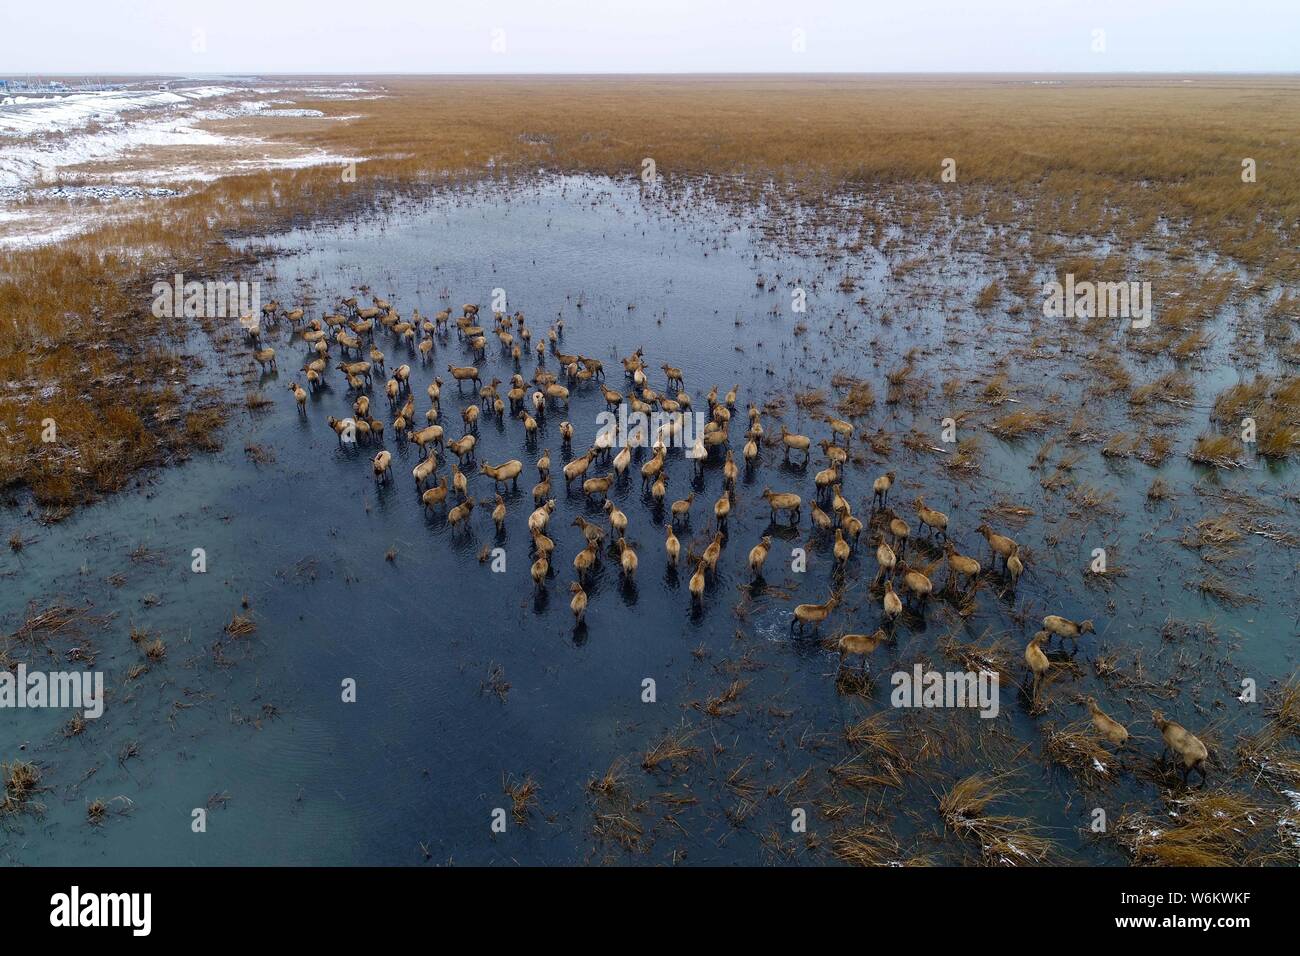 Aerial view of a flock of Pere David's deer, also known as the milu or elaphure, after a snowfall at the Dafeng Milu Nature Reserve in Dafeng district Stock Photo